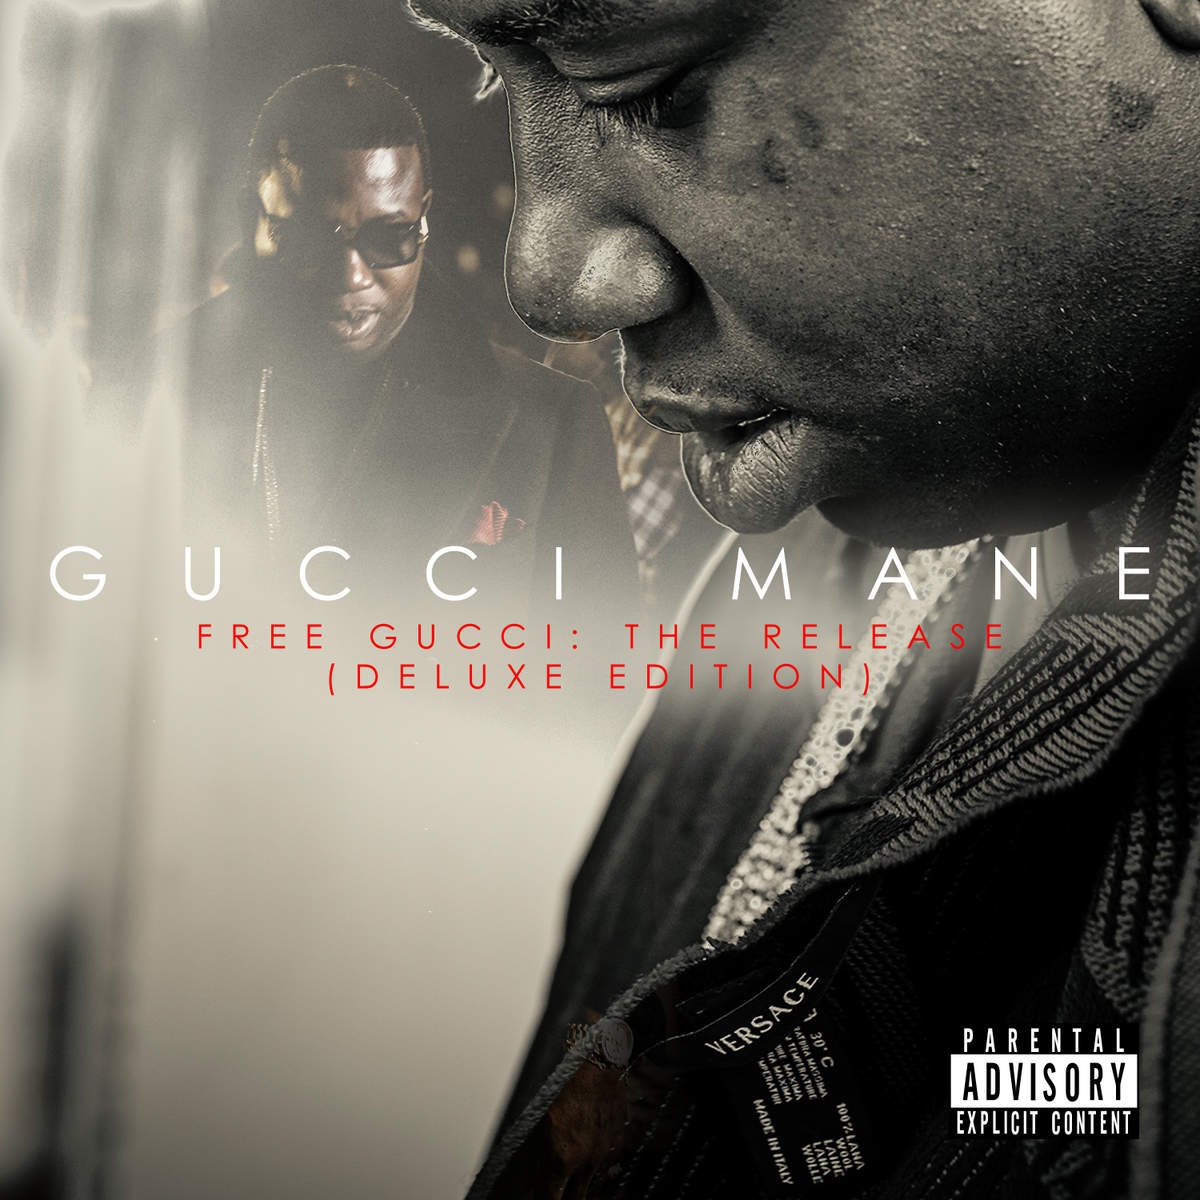 Free Gucci: The Release (Deluxe Edition)